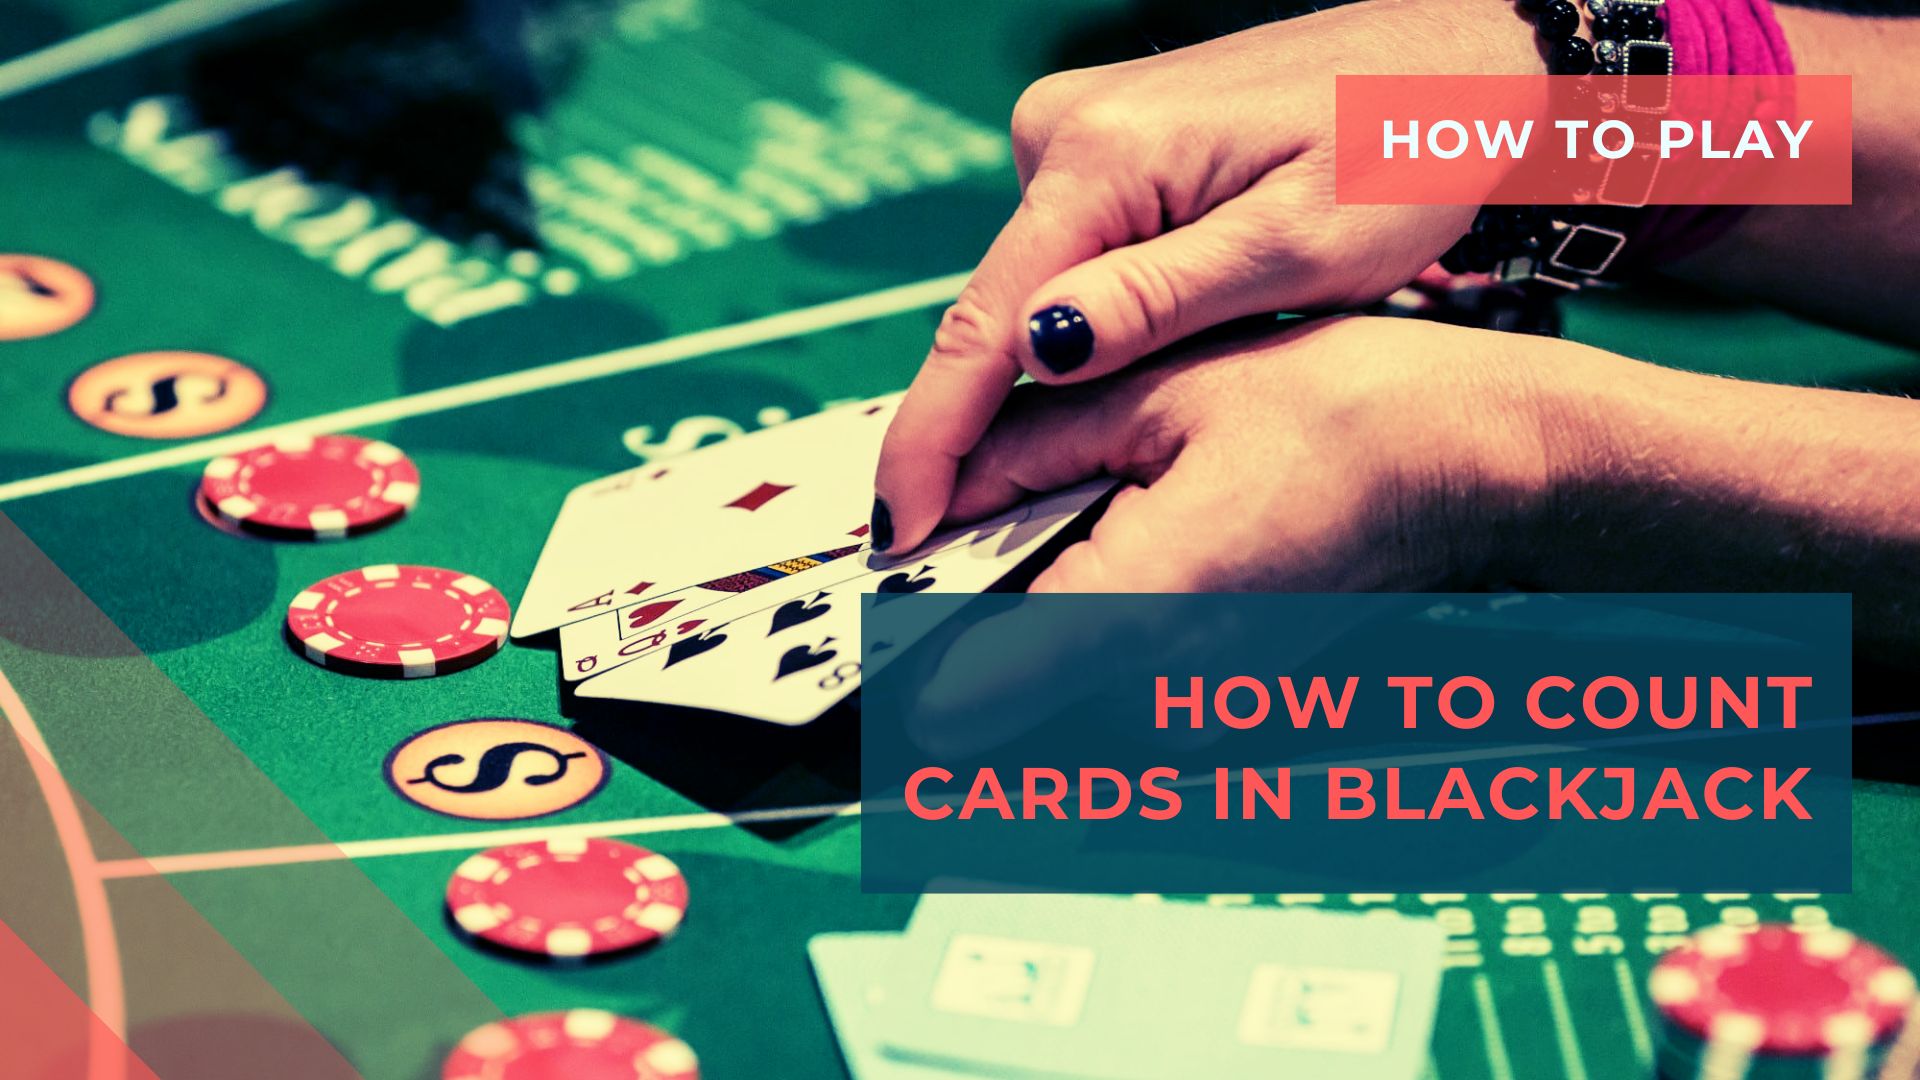 How to count cards in Blackjack and is it legal